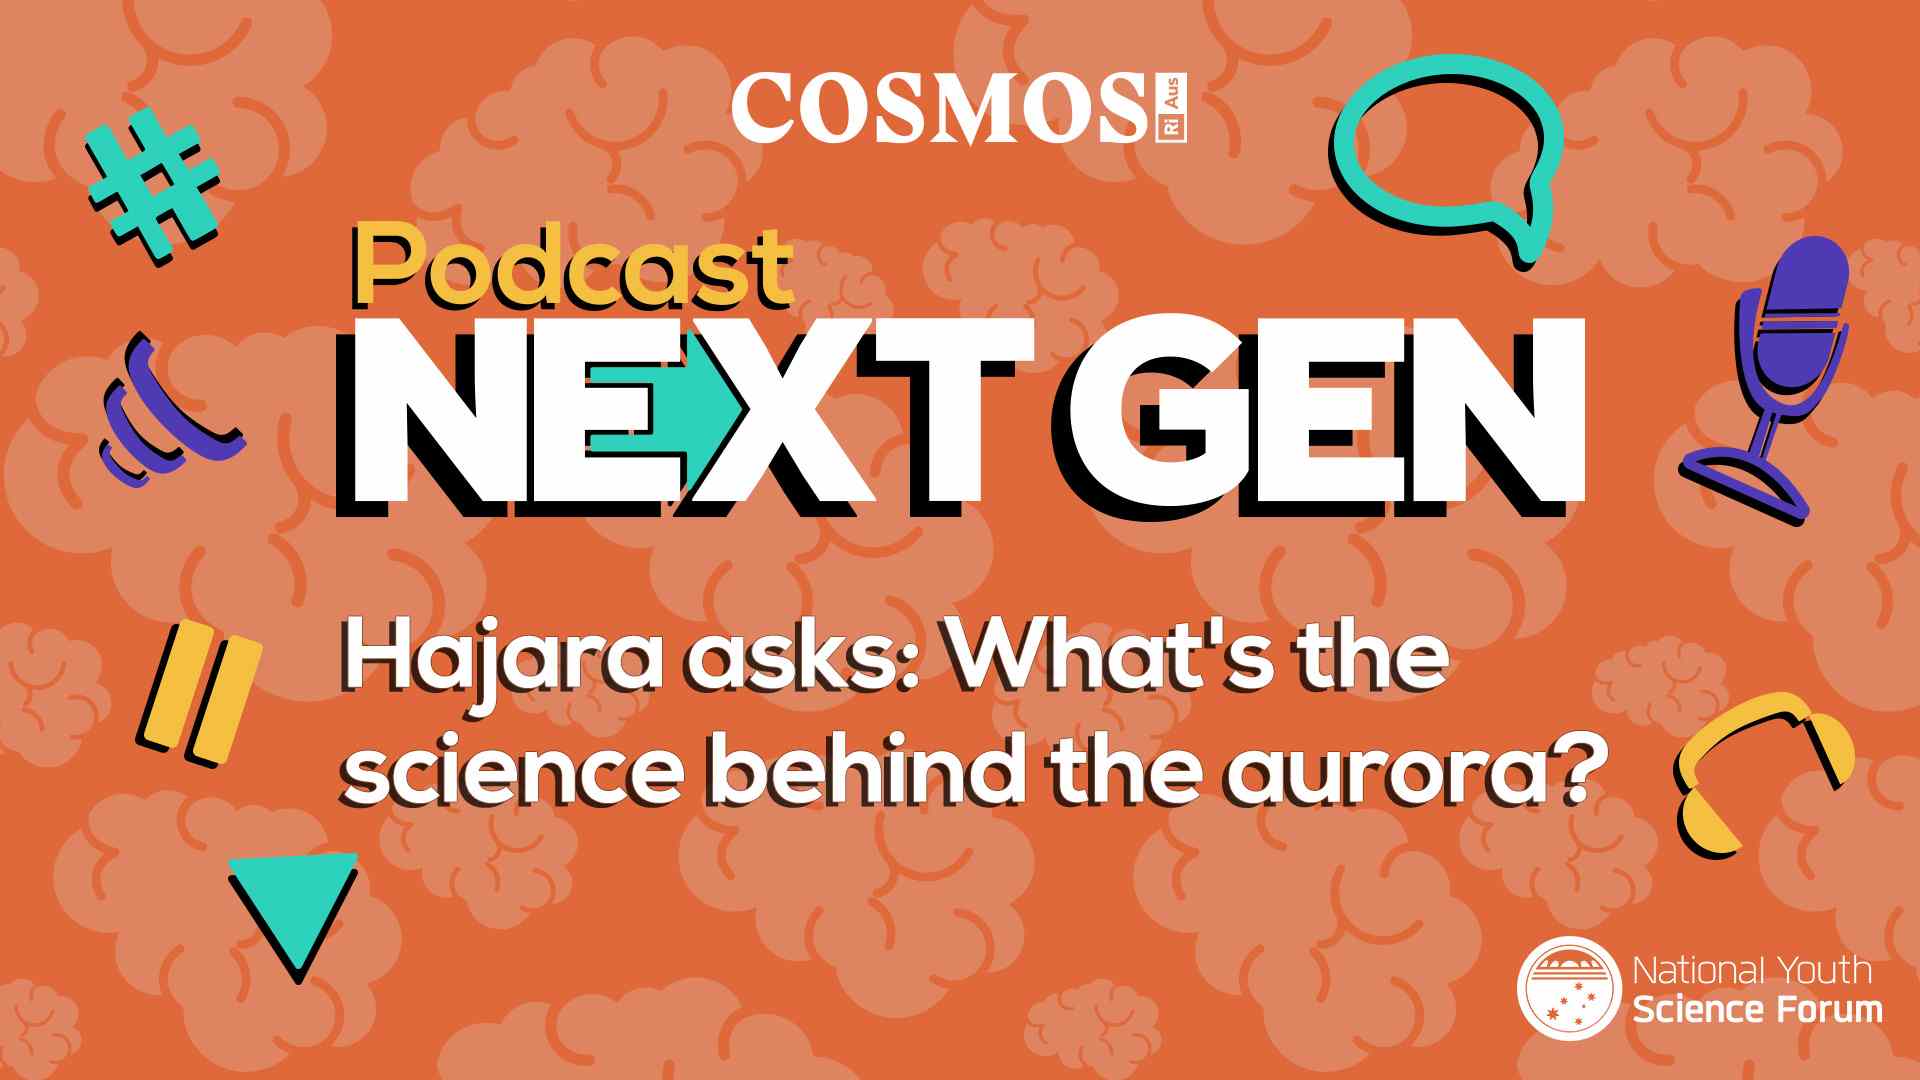 PODCAST NEXT GEN: What’s the science behind the aurora?